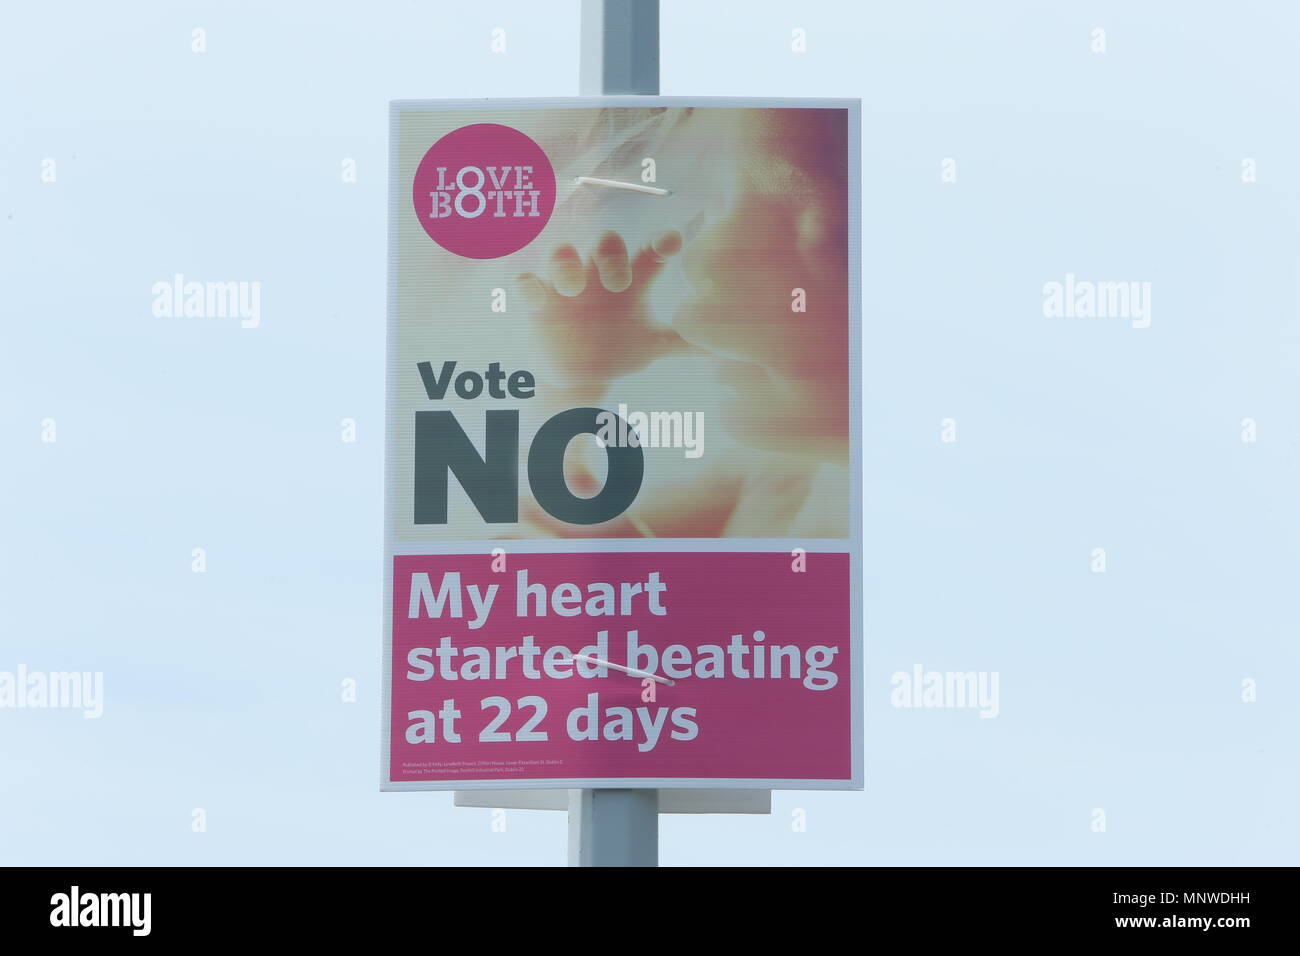 image-of-a-campaign-poster-for-the-no-side-in-the-irish-8th-amendment-referendum-the-no-side-campaigns-to-maintain-the-8th-amendment-to-the-irish-constitution-which-stipulates-rights-for-the-unborn-as-part-of-a-move-to-maintain-the-republic-of-irelands-current-abortion-laws-MNWDHH.jpg